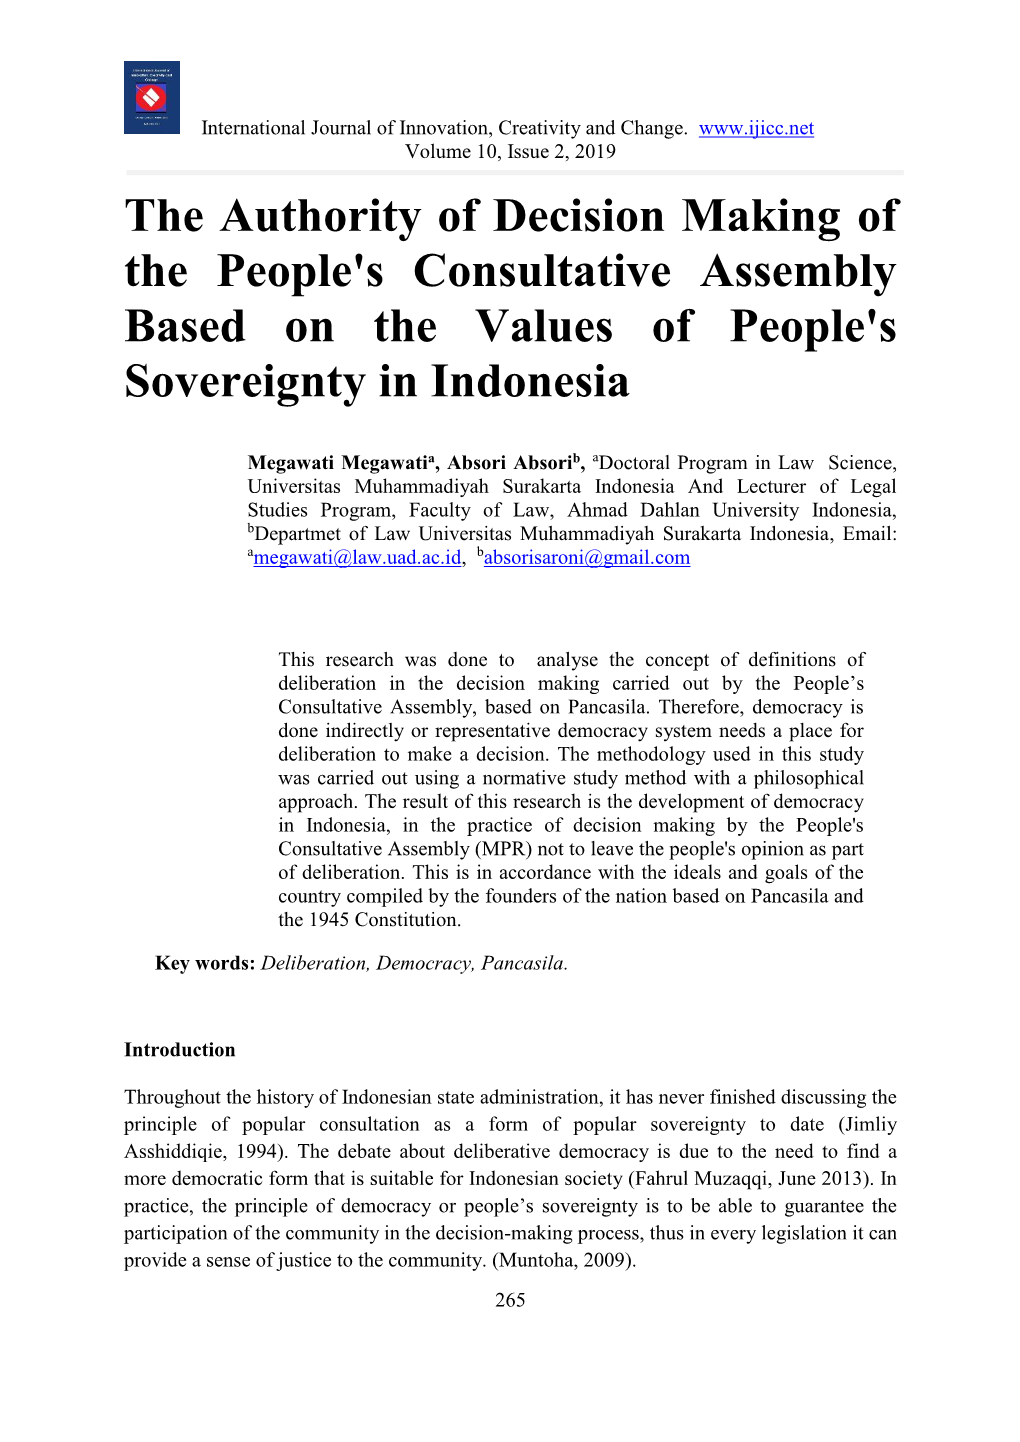 The Authority of Decision Making of the People's Consultative Assembly Based on the Values of People's Sovereignty in Indonesia